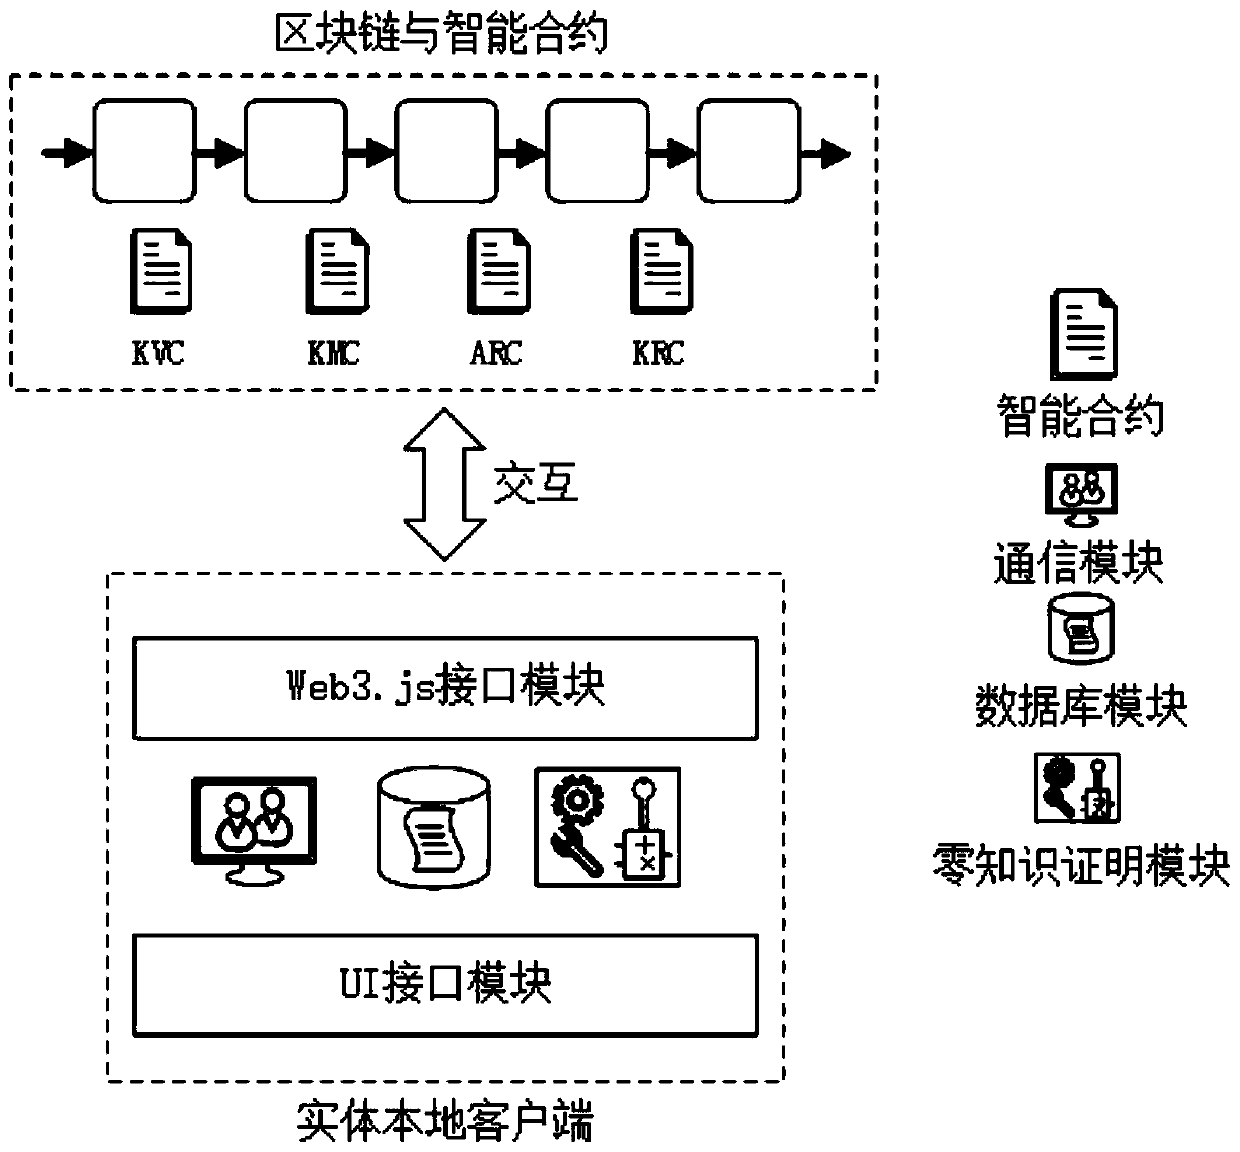 Identity management and authentication system and method based on block chain and zero knowledge proof